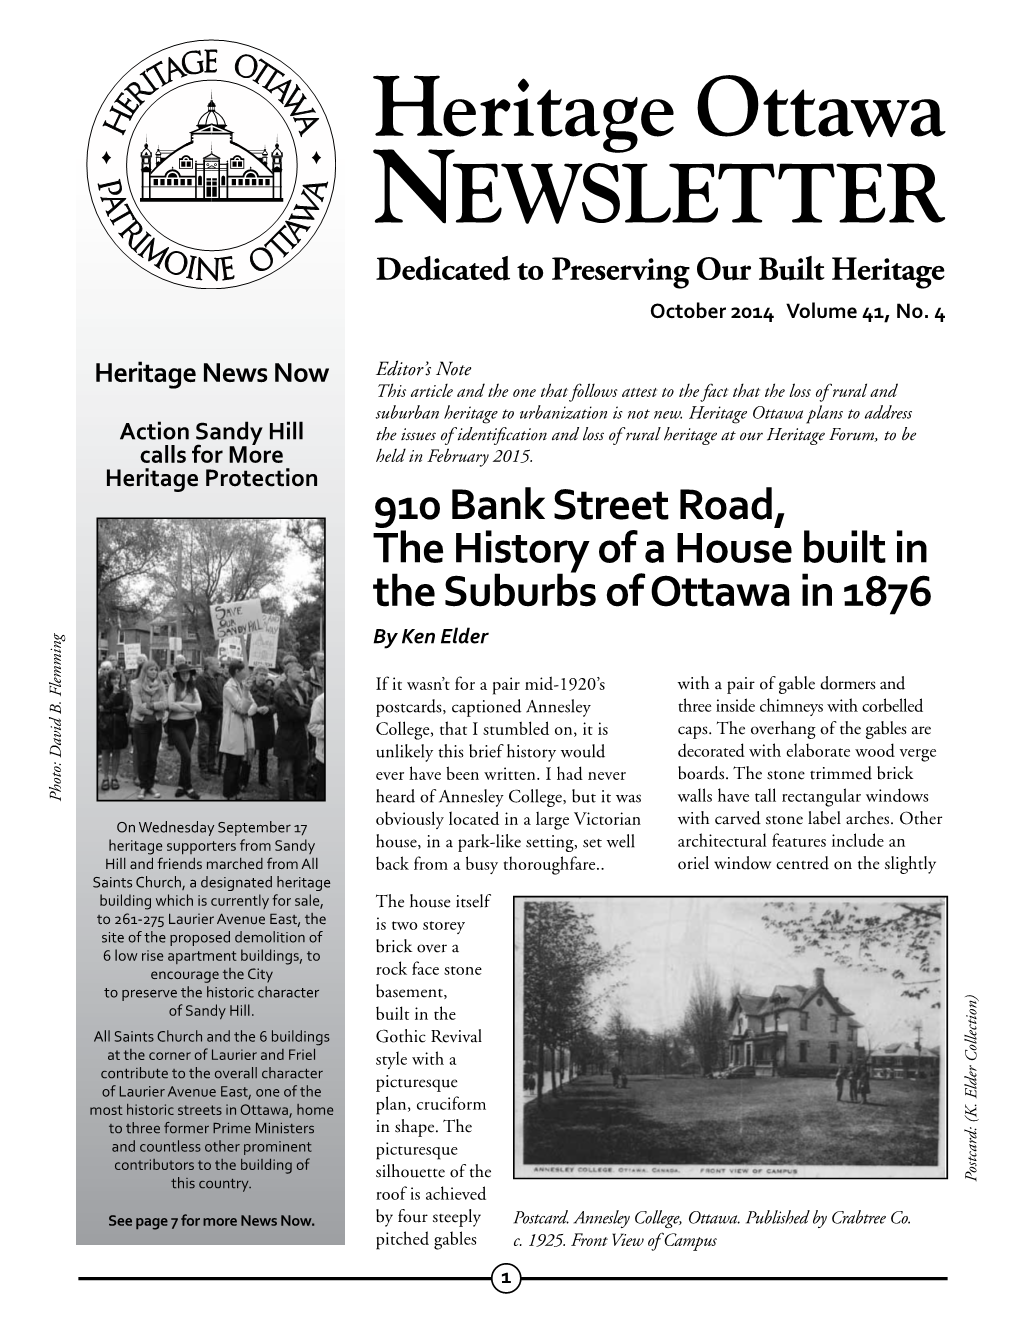 910 Bank Street Road, the History of a House Built in the Suburbs of Ottawa in 1876 by Ken Elder